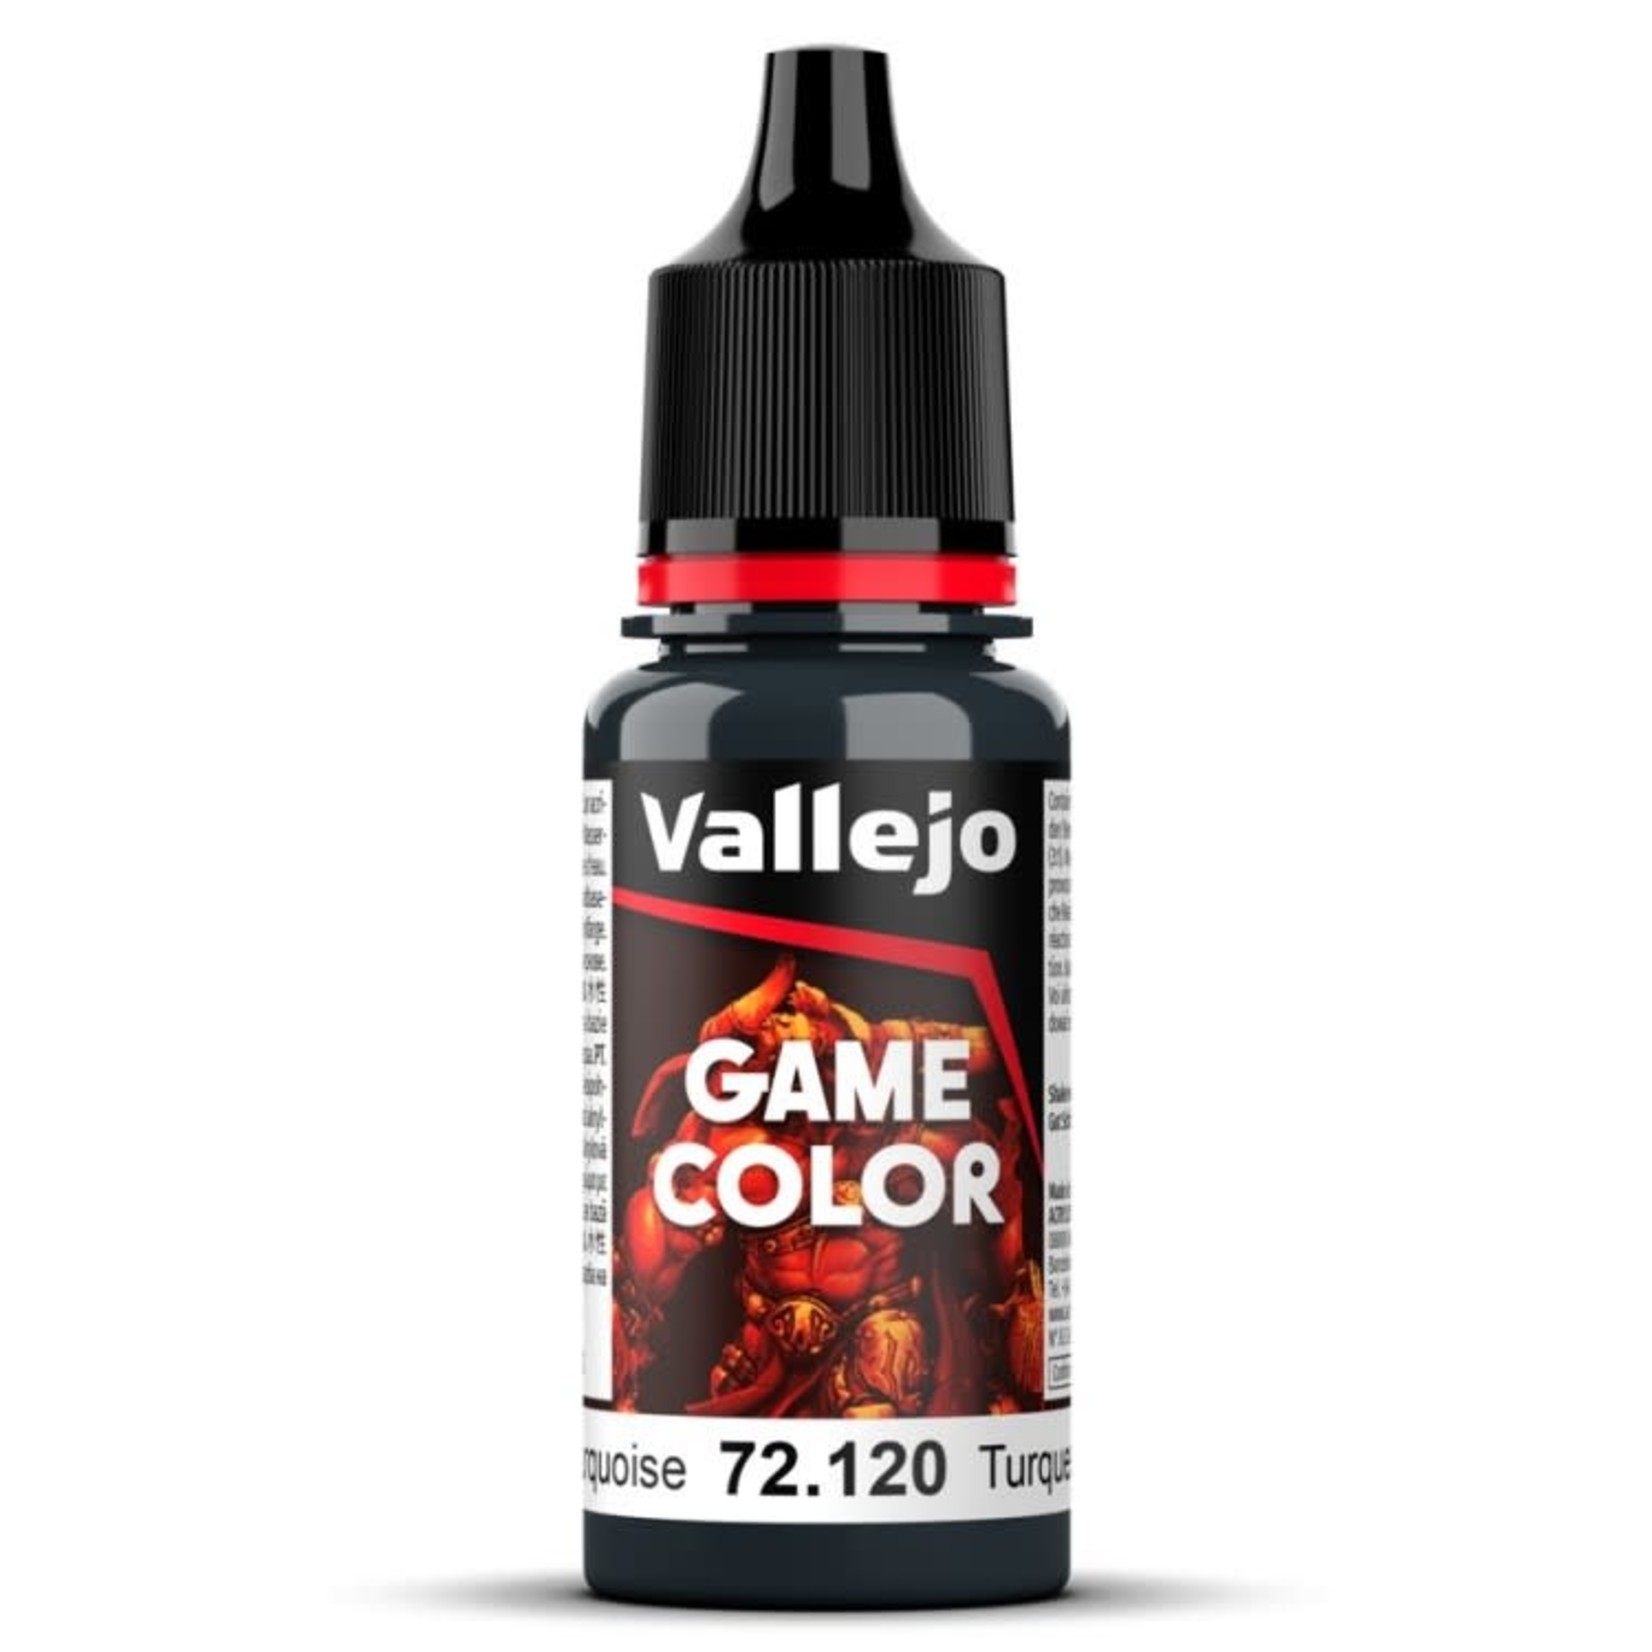 Vallejo Paint: Game Color (Abyssal Turquoise)